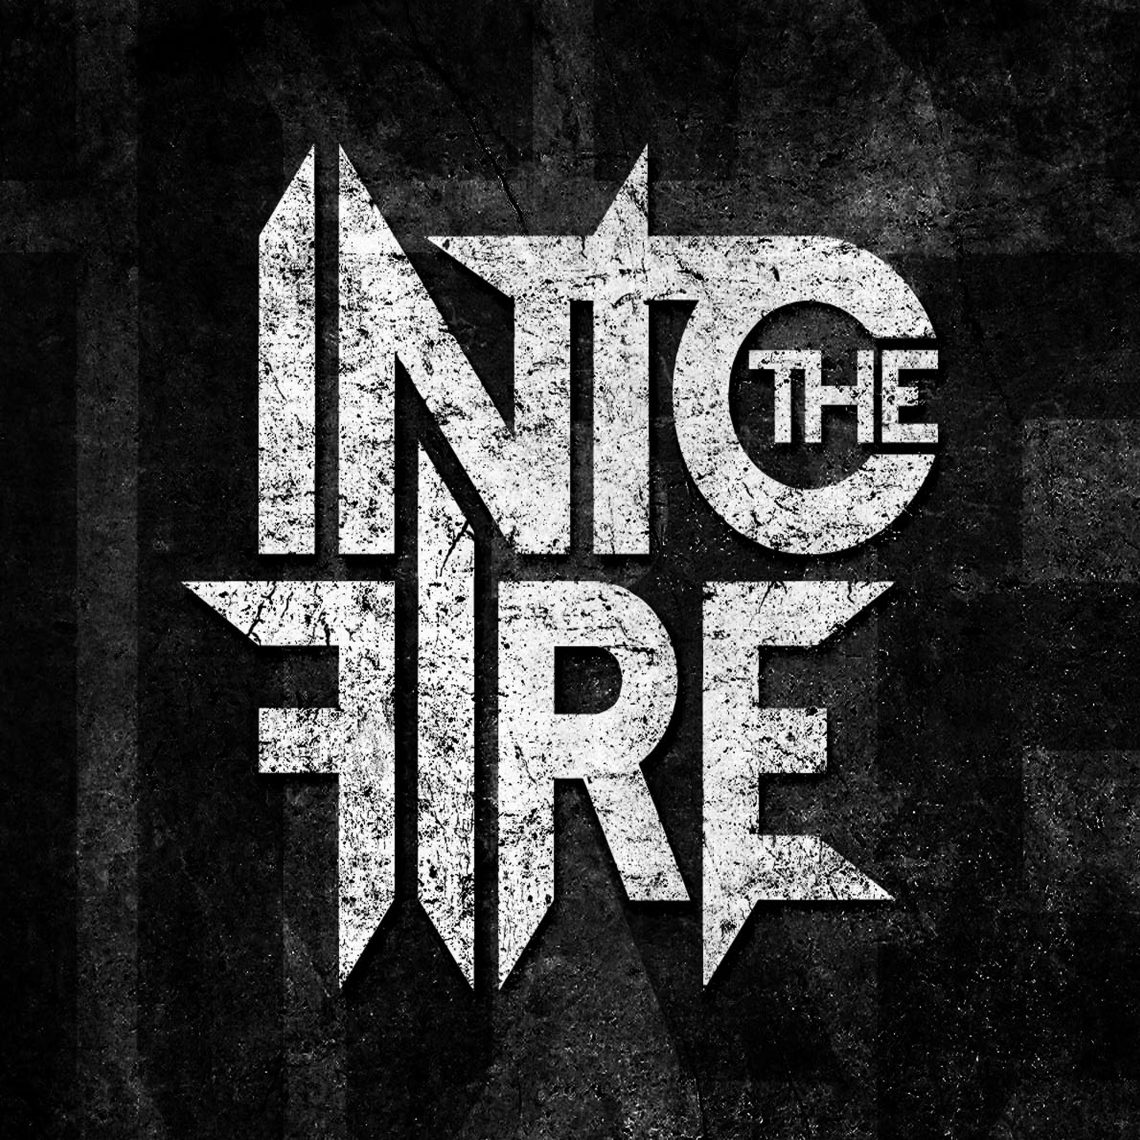 INTO THE FIRE SELF TITLED DEBUT EP